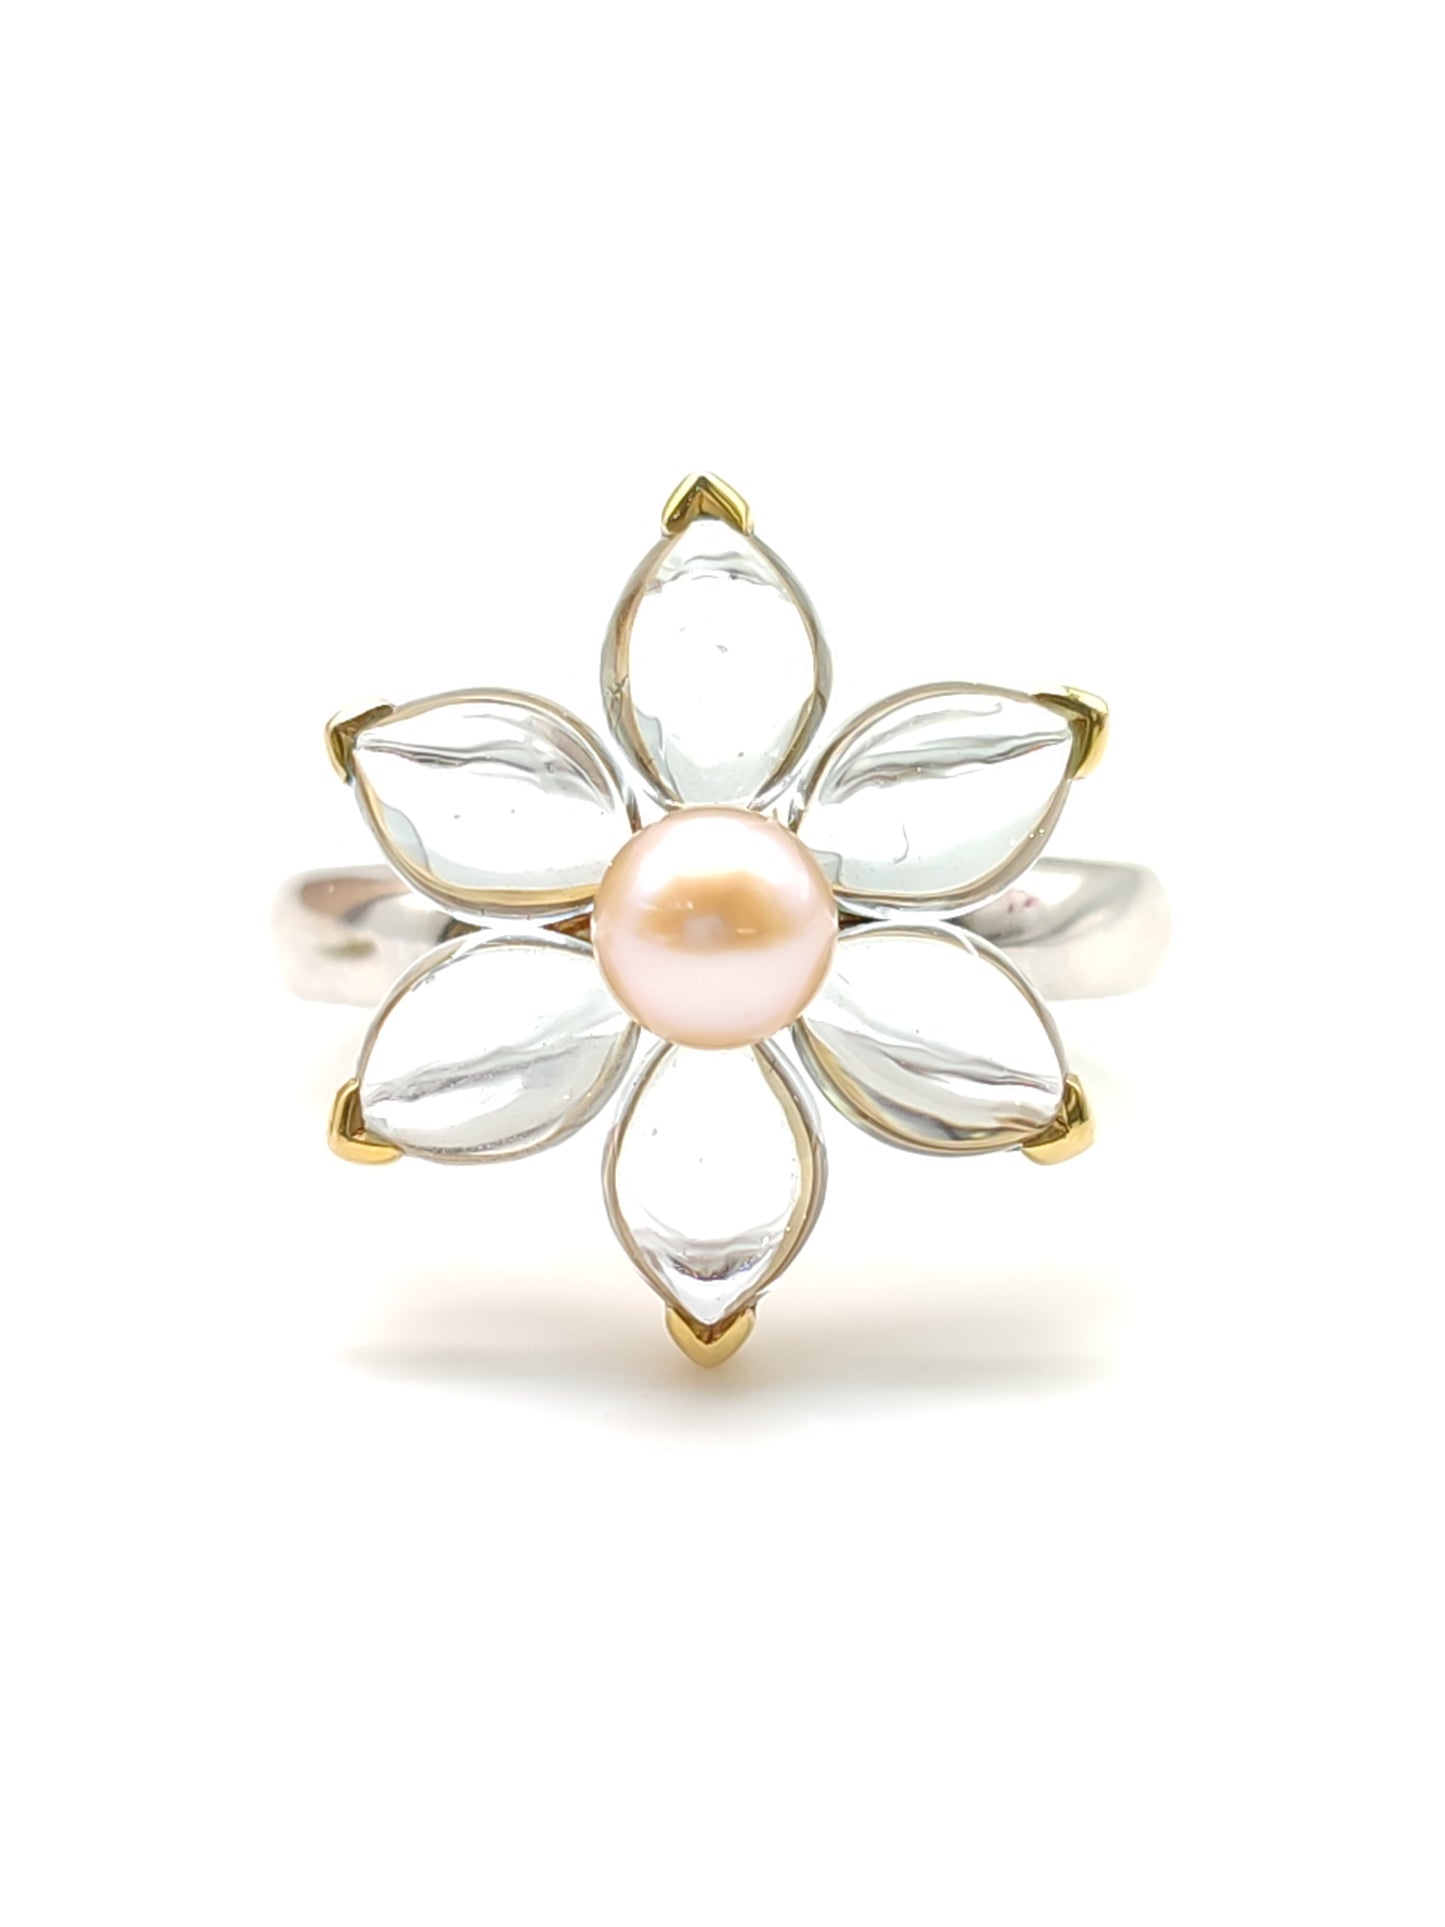 Pavan - Gold ring with pearl and aquamarine